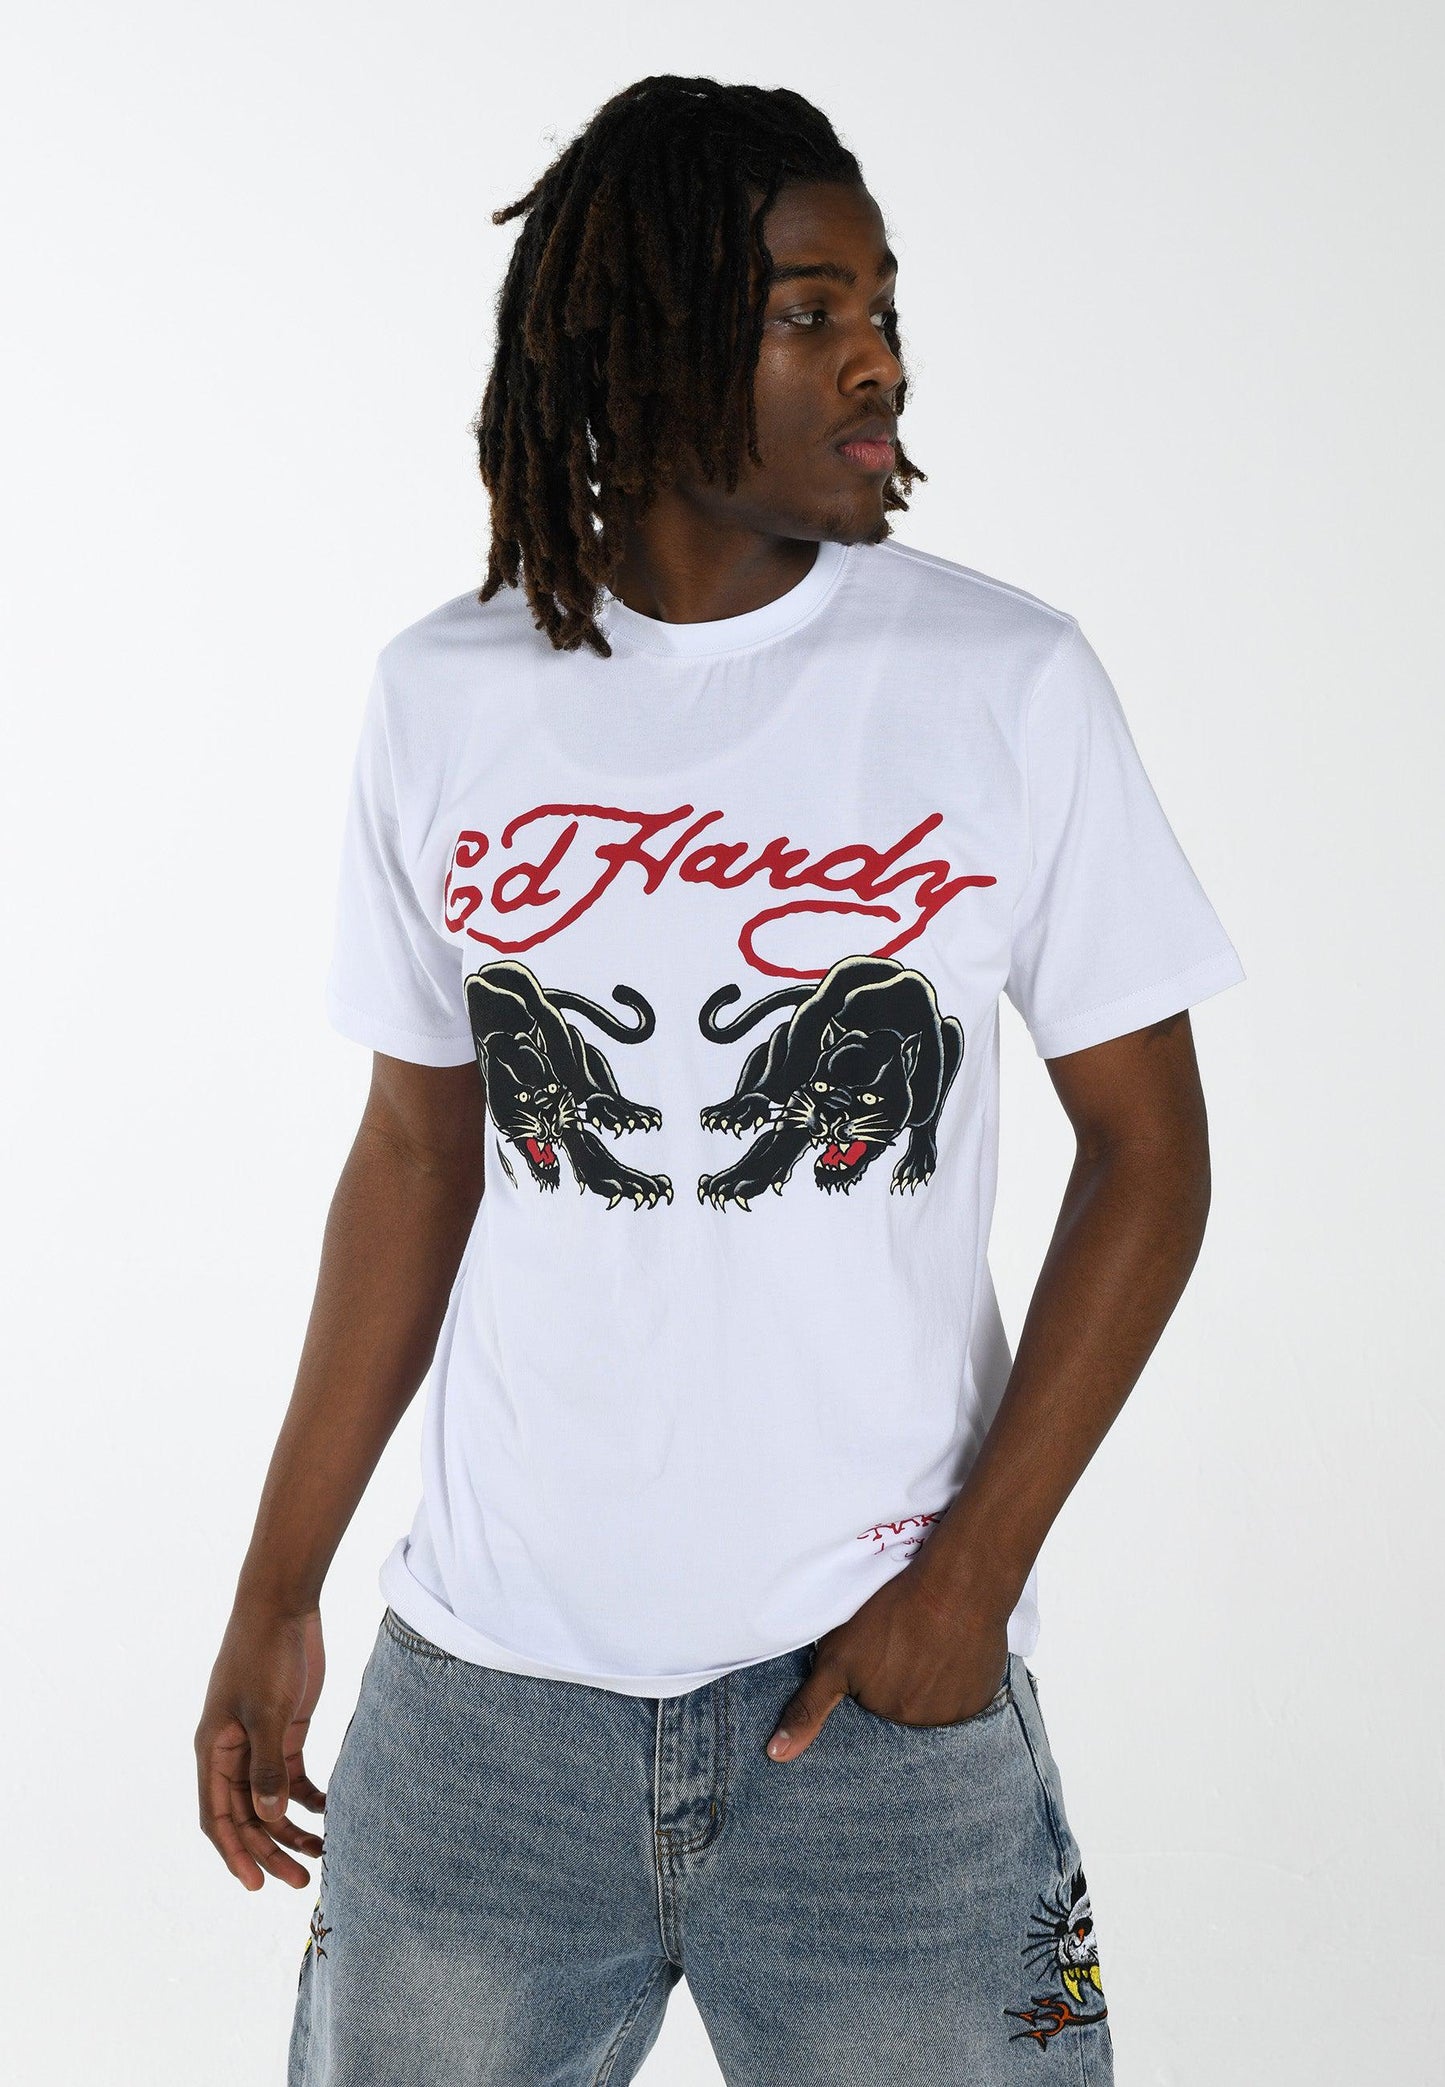 Ed Hardy Men's Double-Panther T-shirt White - ED3003